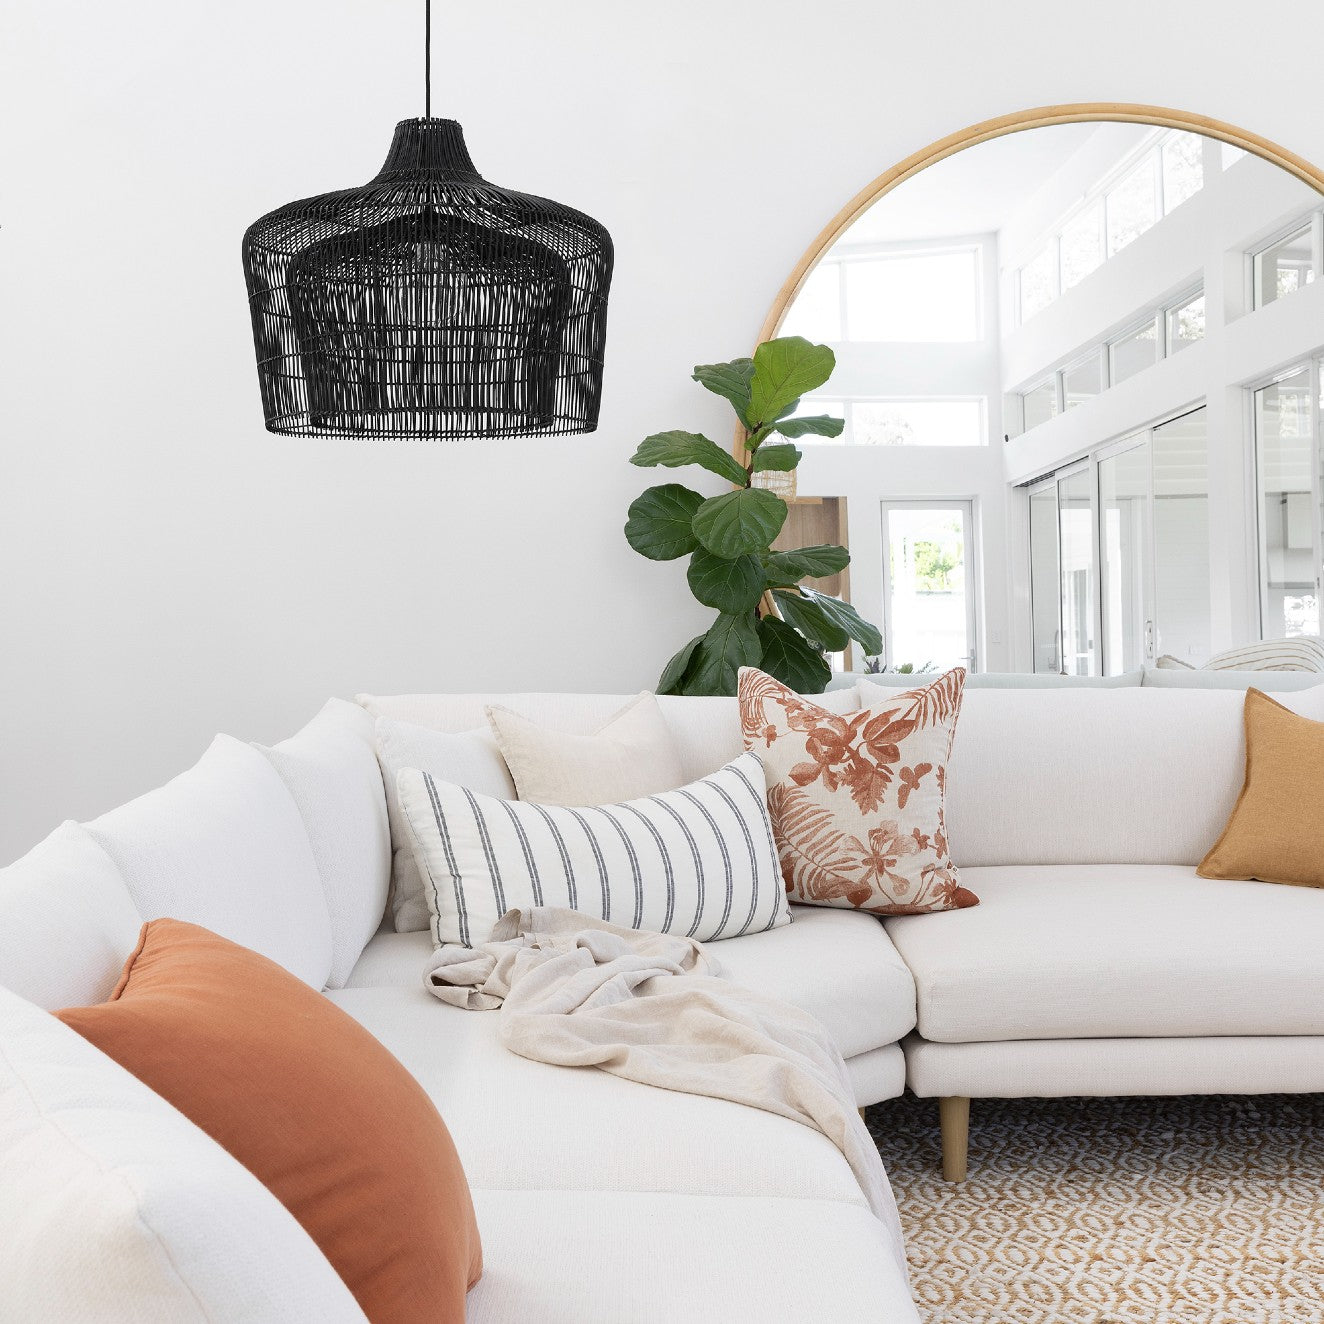 Large rattan pendant light Australia. Black doubel caged rattan pendant in light, white lounge room with over sized round rattan mirror, and comfortable couch. ra